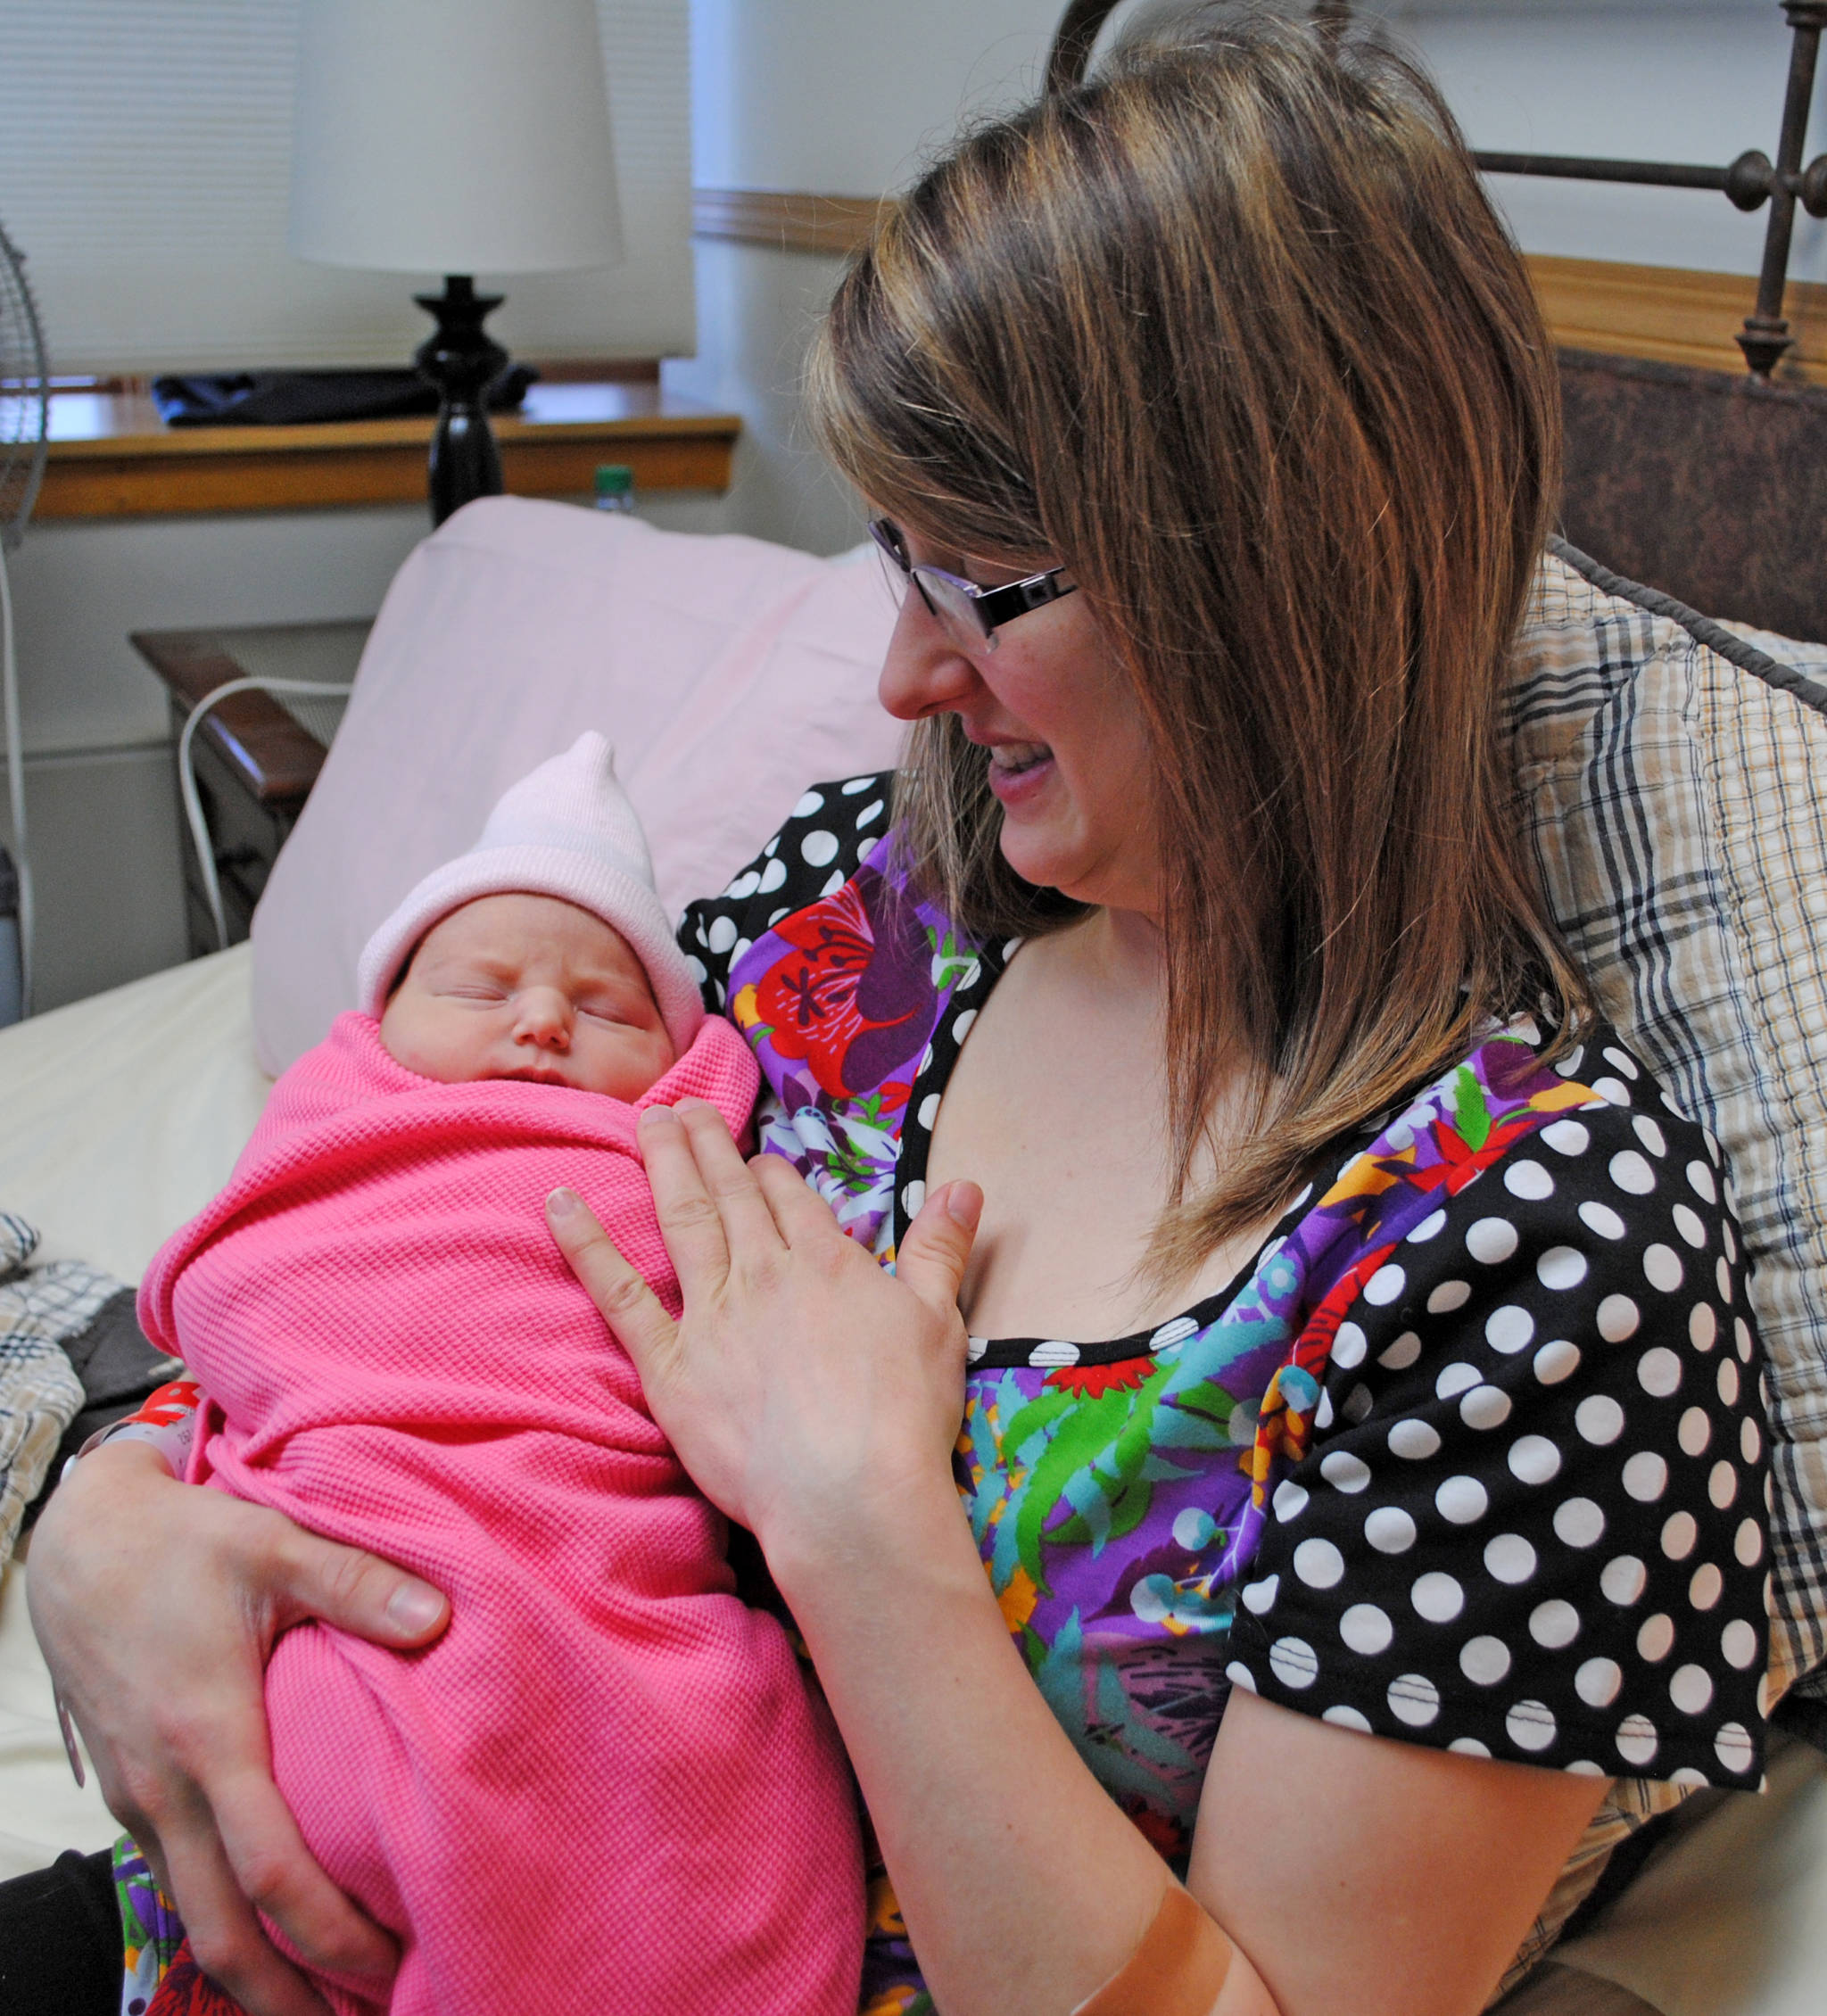 Chelsea Samora of Kenai holds her newborn daughter, Zoe, whose Jan. 3 birthday makes her the first baby born in Central Peninsula Hospital in 2018. (Photo by Kat Sorensen/Peninsula Clarion)